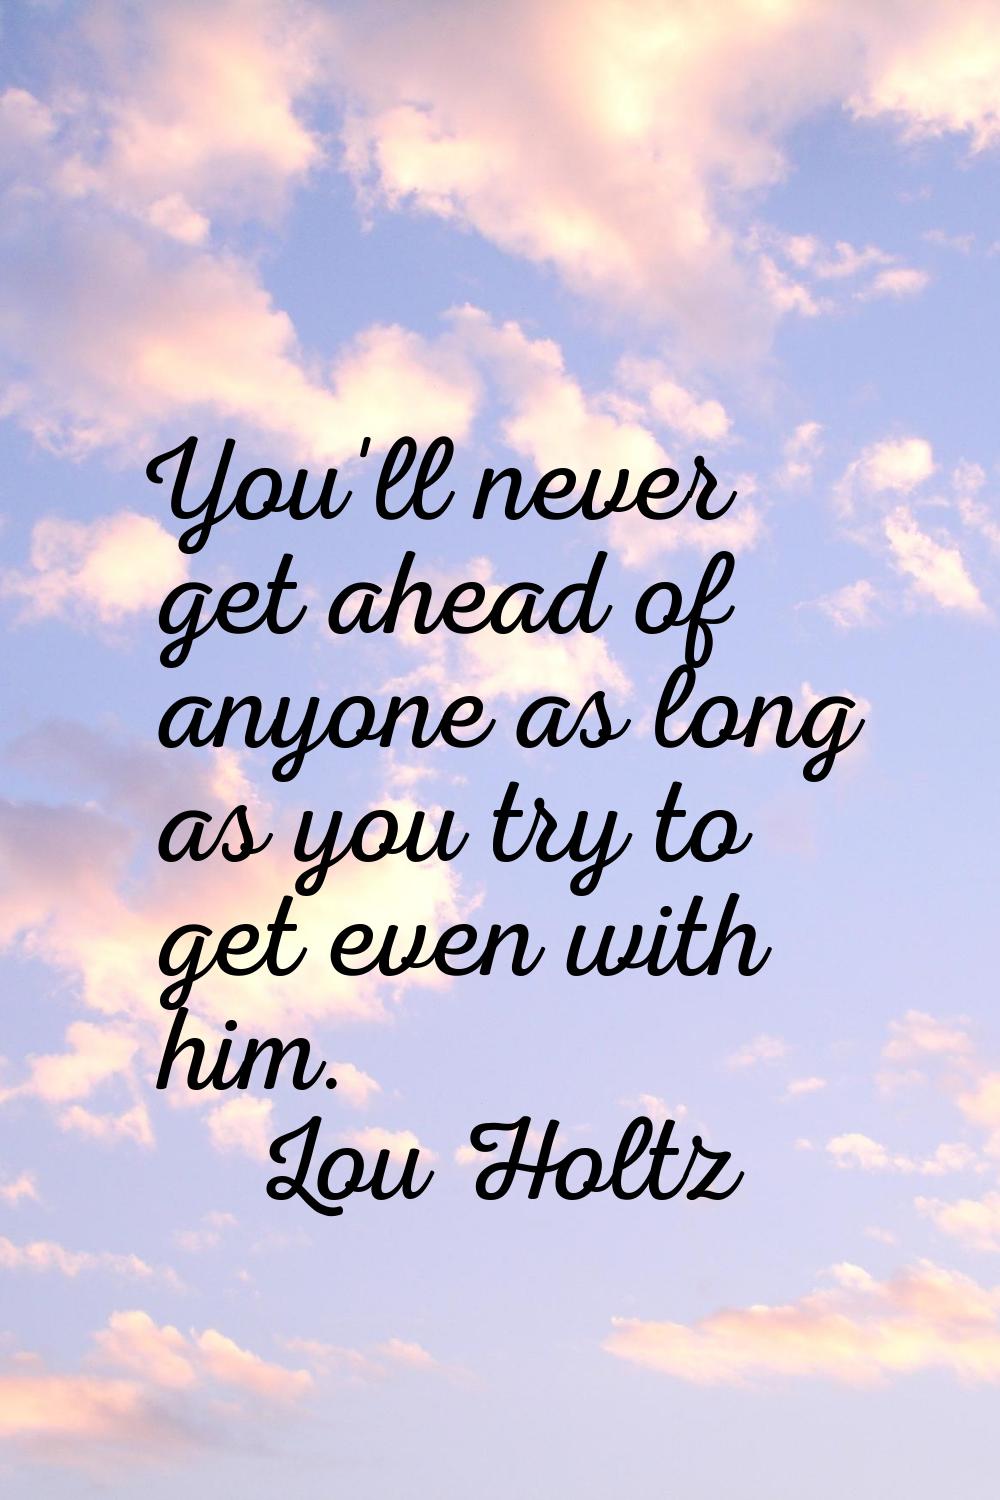 You'll never get ahead of anyone as long as you try to get even with him.